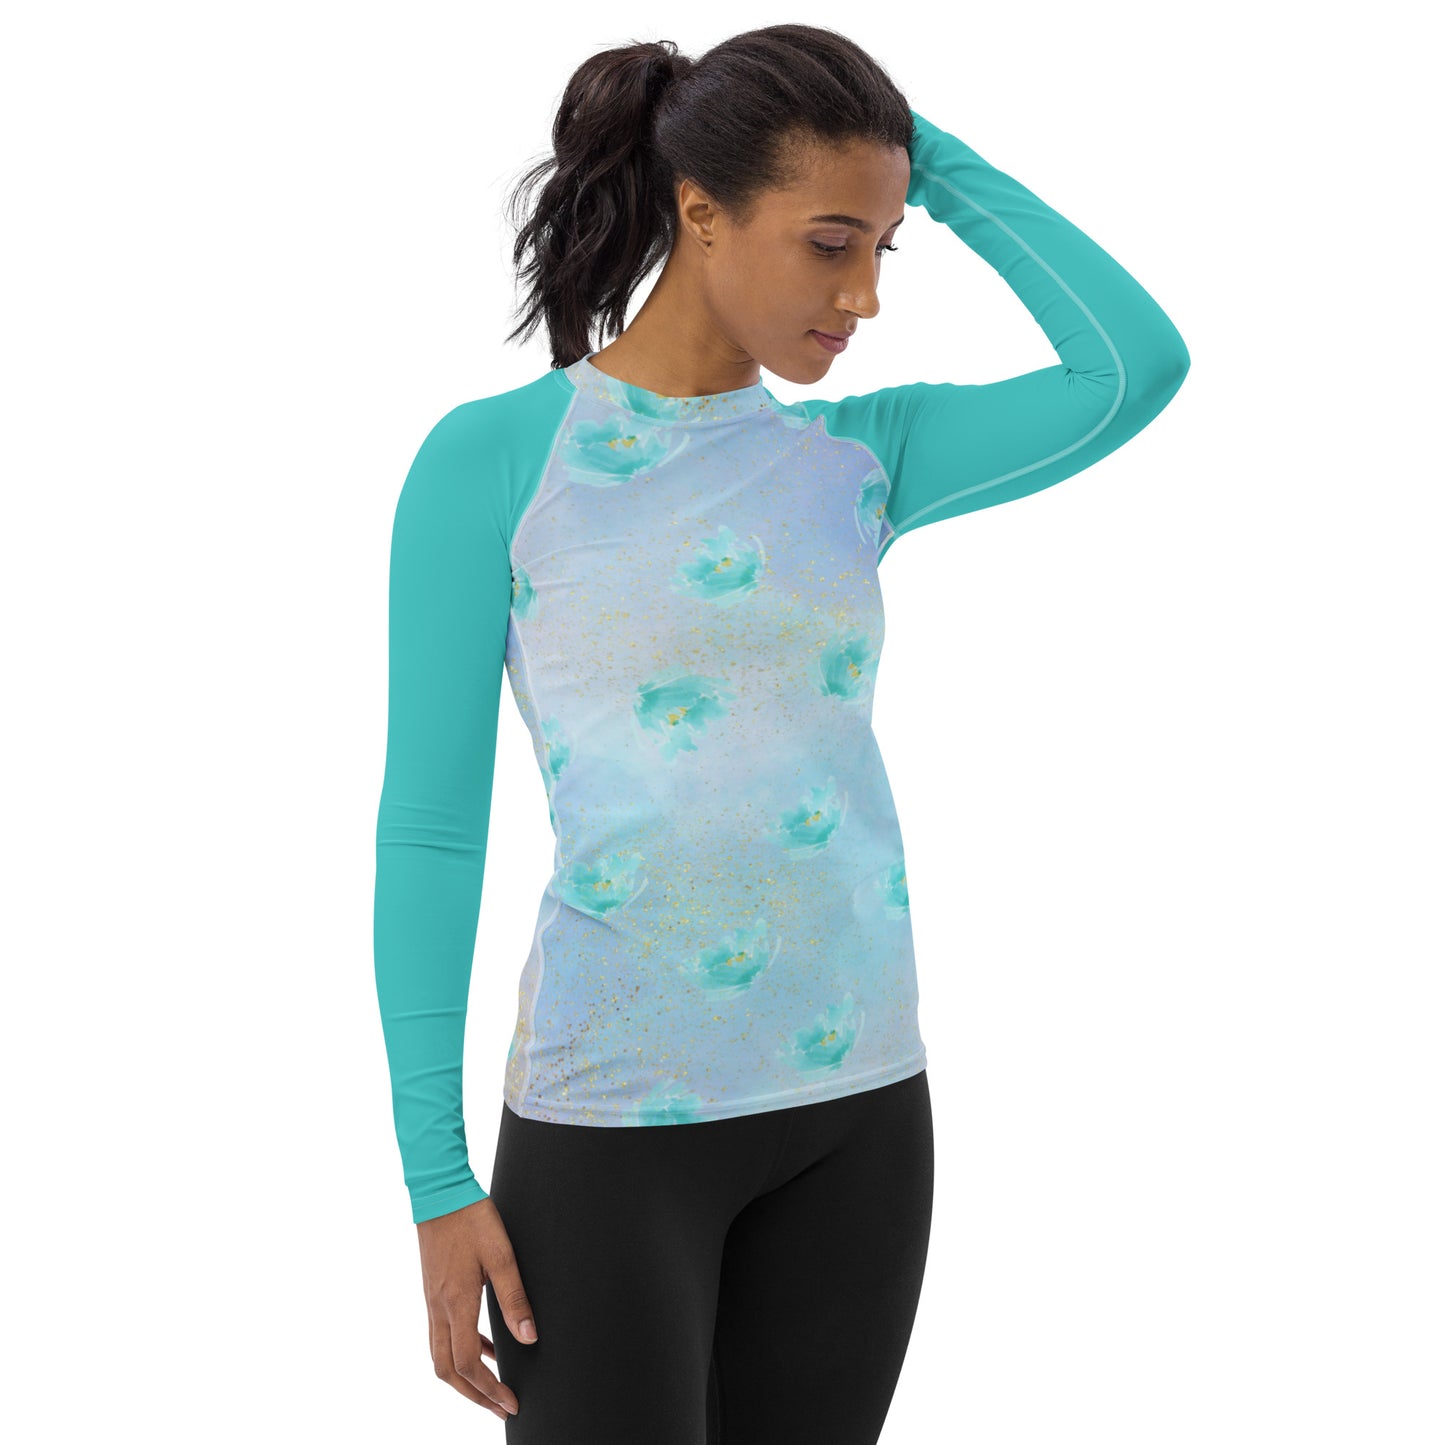 Women's All Over Print - Watercolors - Lightweight Long Sleeve Performance Shirt - 50+ UV Protection - Moisture Wicking